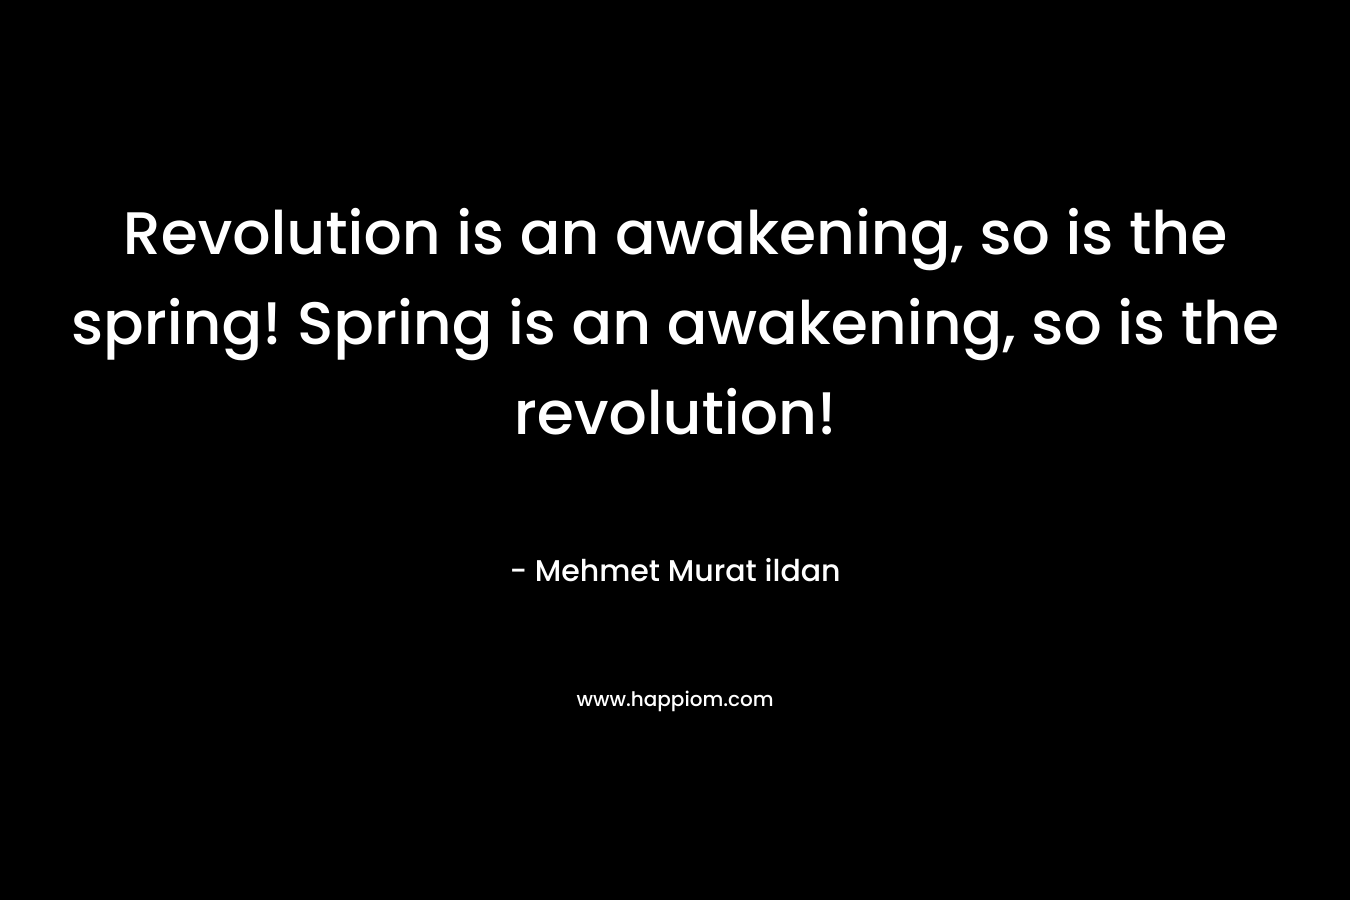 Revolution is an awakening, so is the spring! Spring is an awakening, so is the revolution!